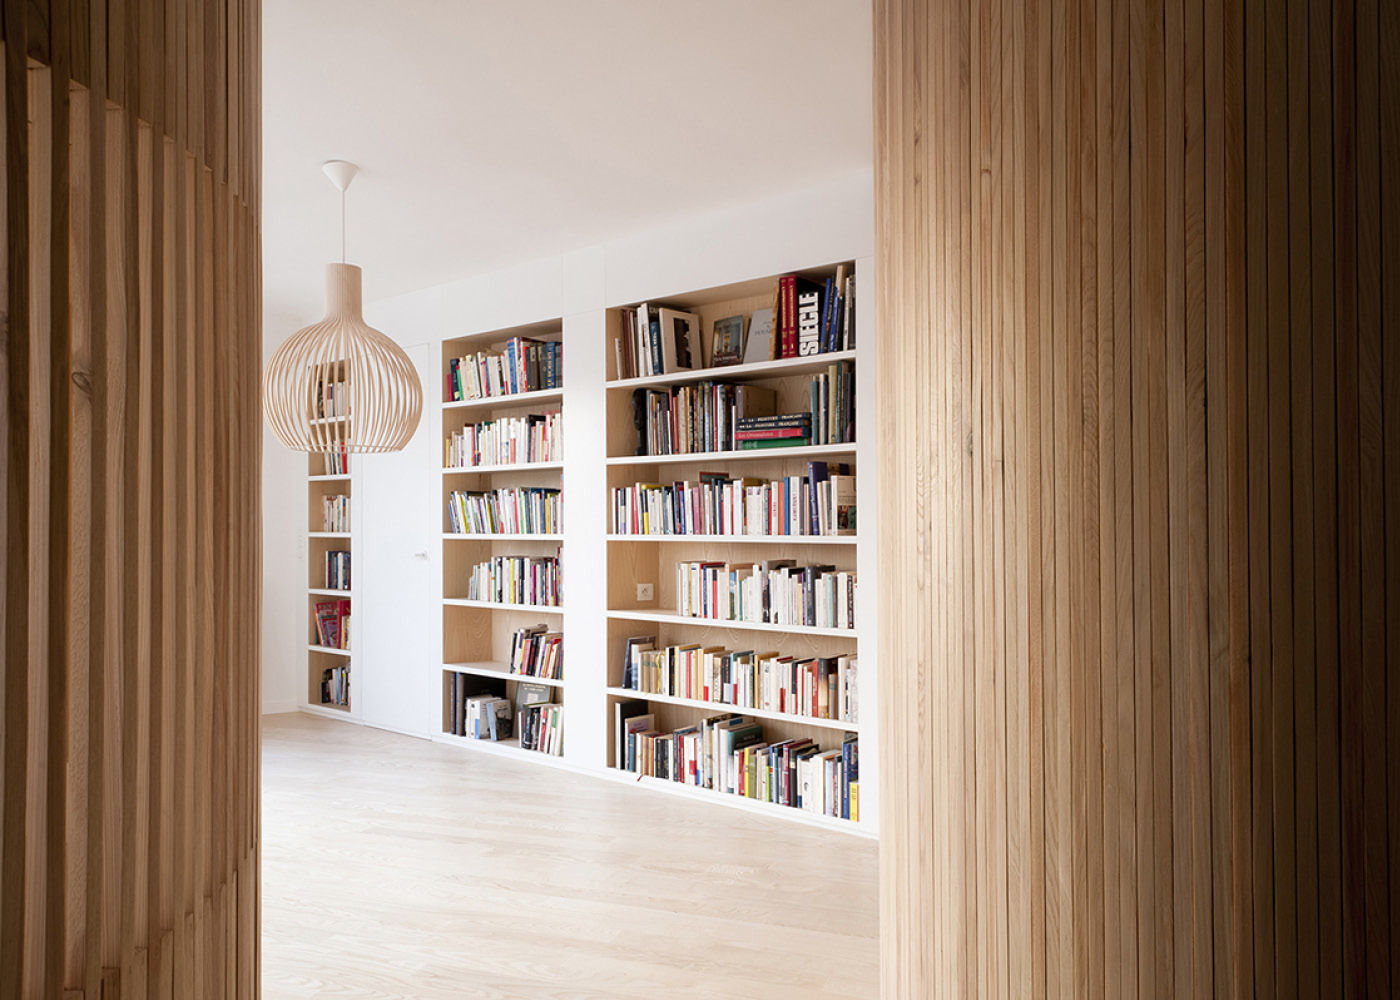 Flat N°4. A small ap, Julien Joly Architecture Julien Joly Architecture غرفة السفرة